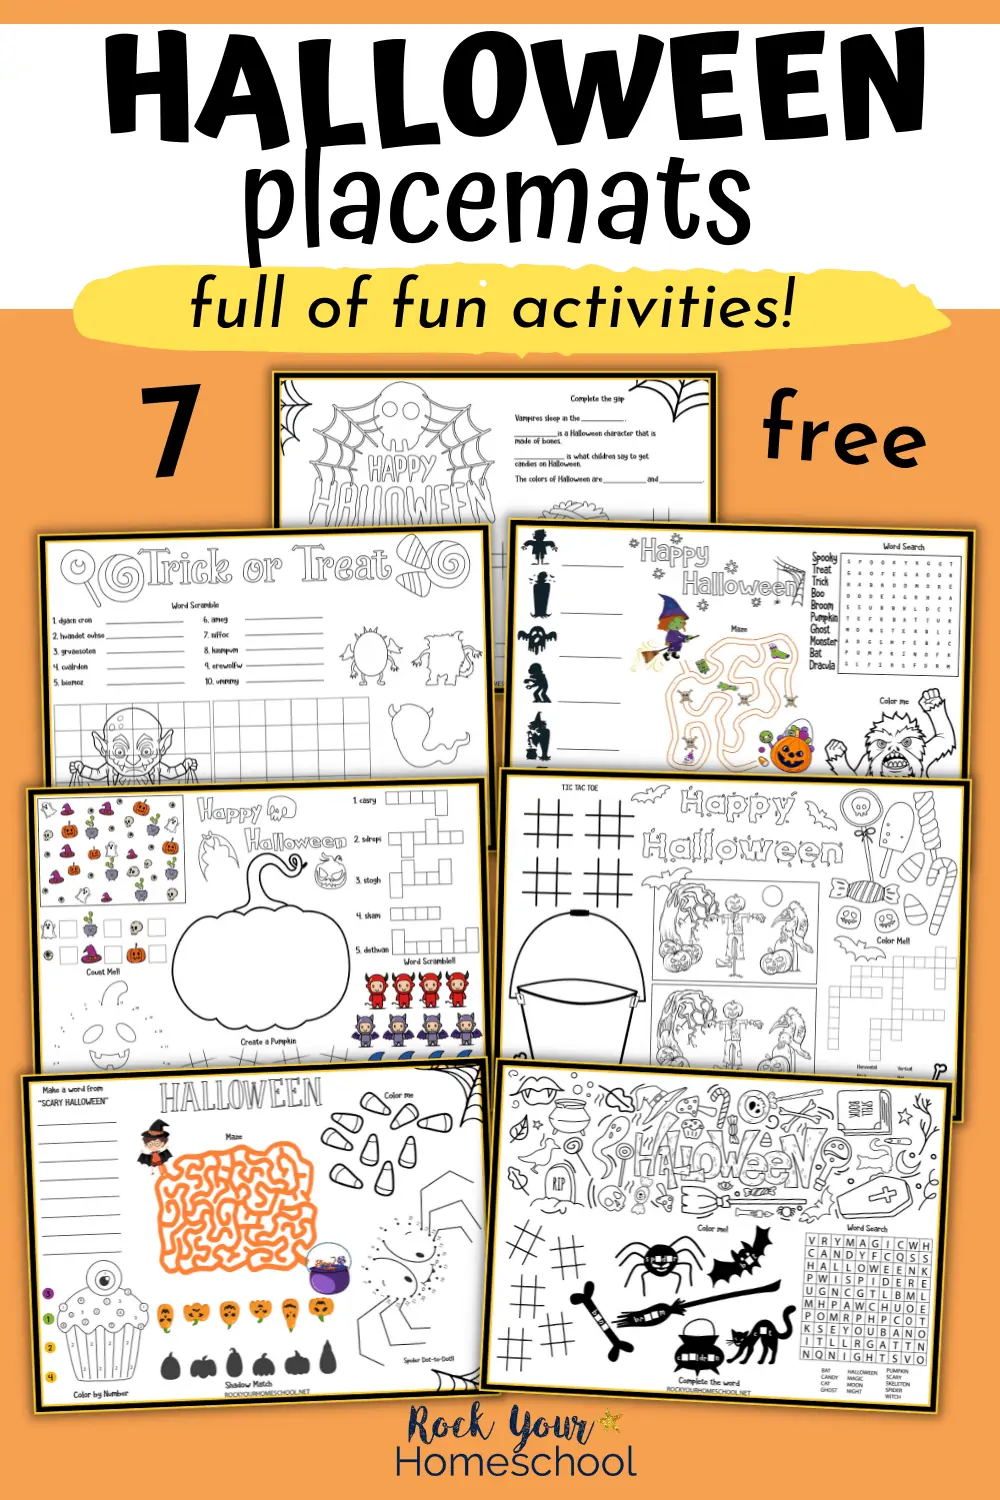 7 Free Halloween Placemats for Fun Holiday Activities for Kids